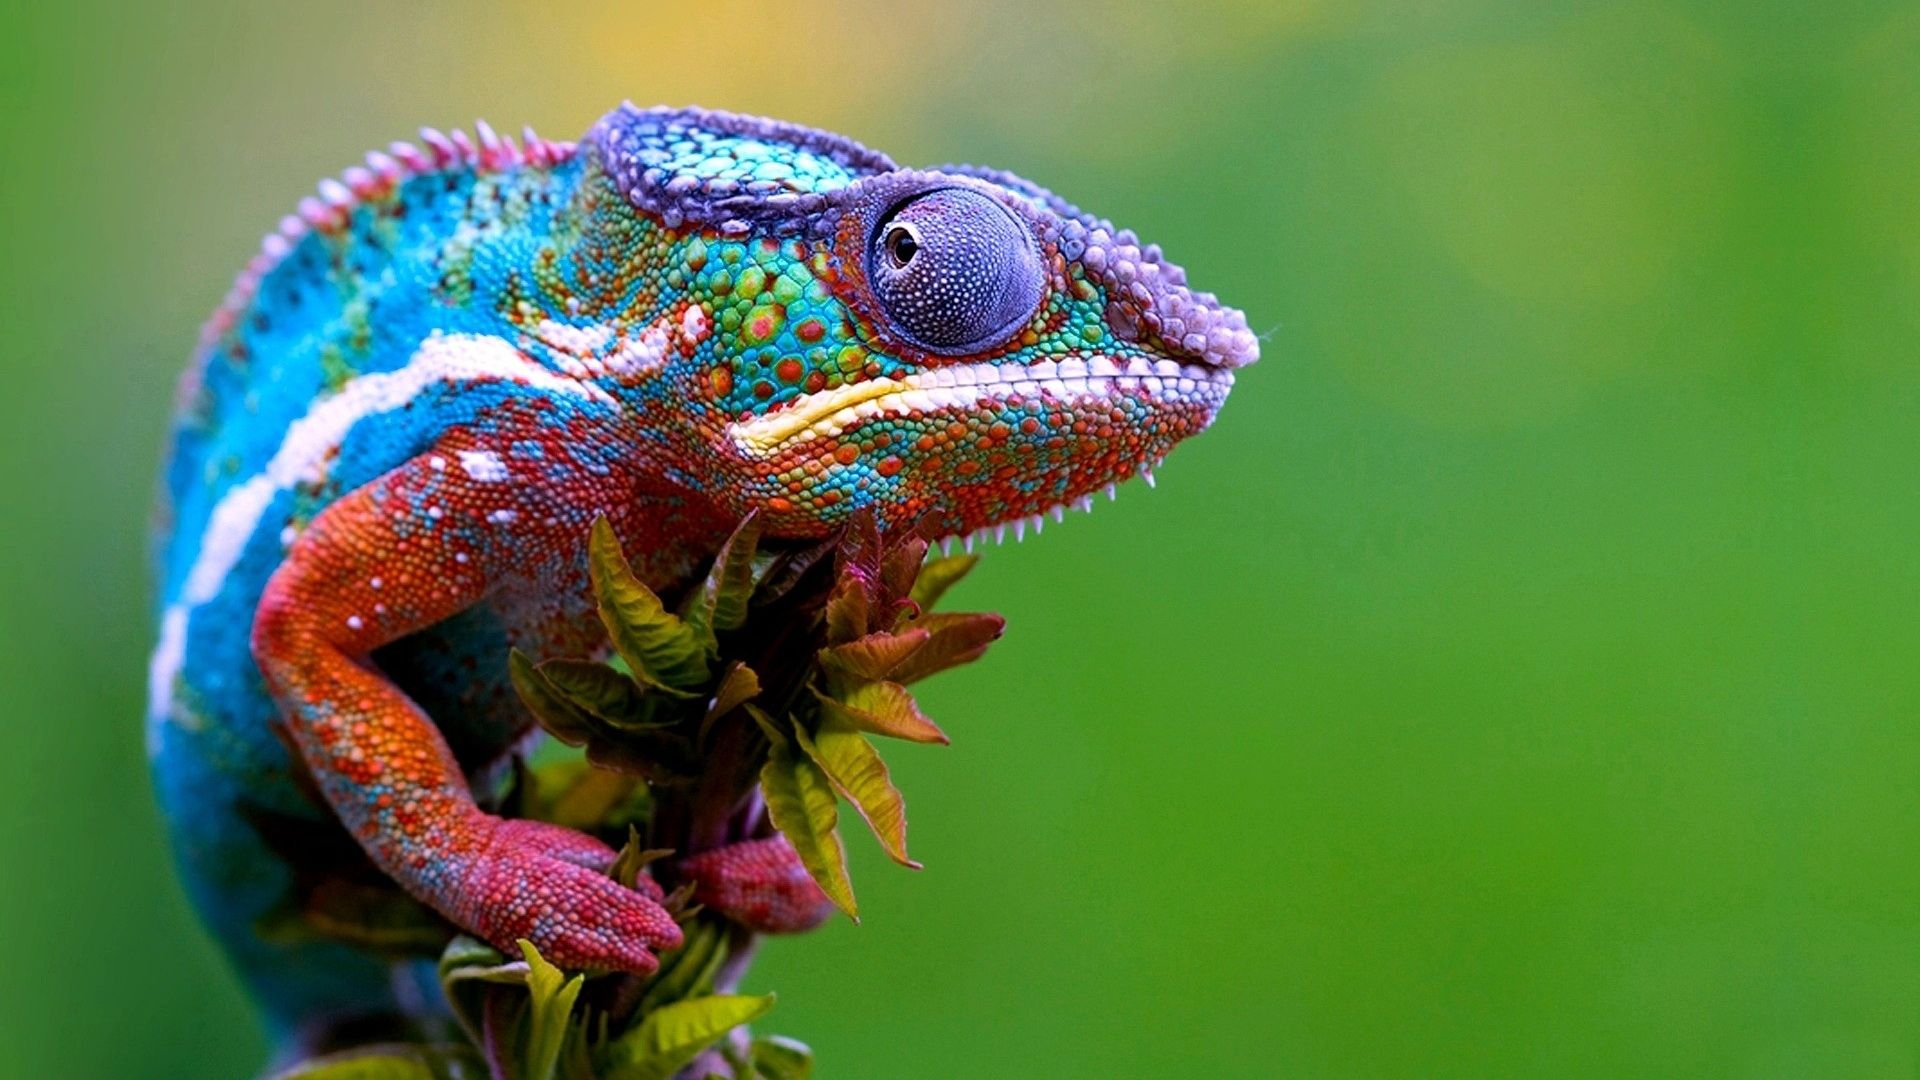 Chameleon Colorful Lizard | Colorful lizards, Lizards and Chameleons